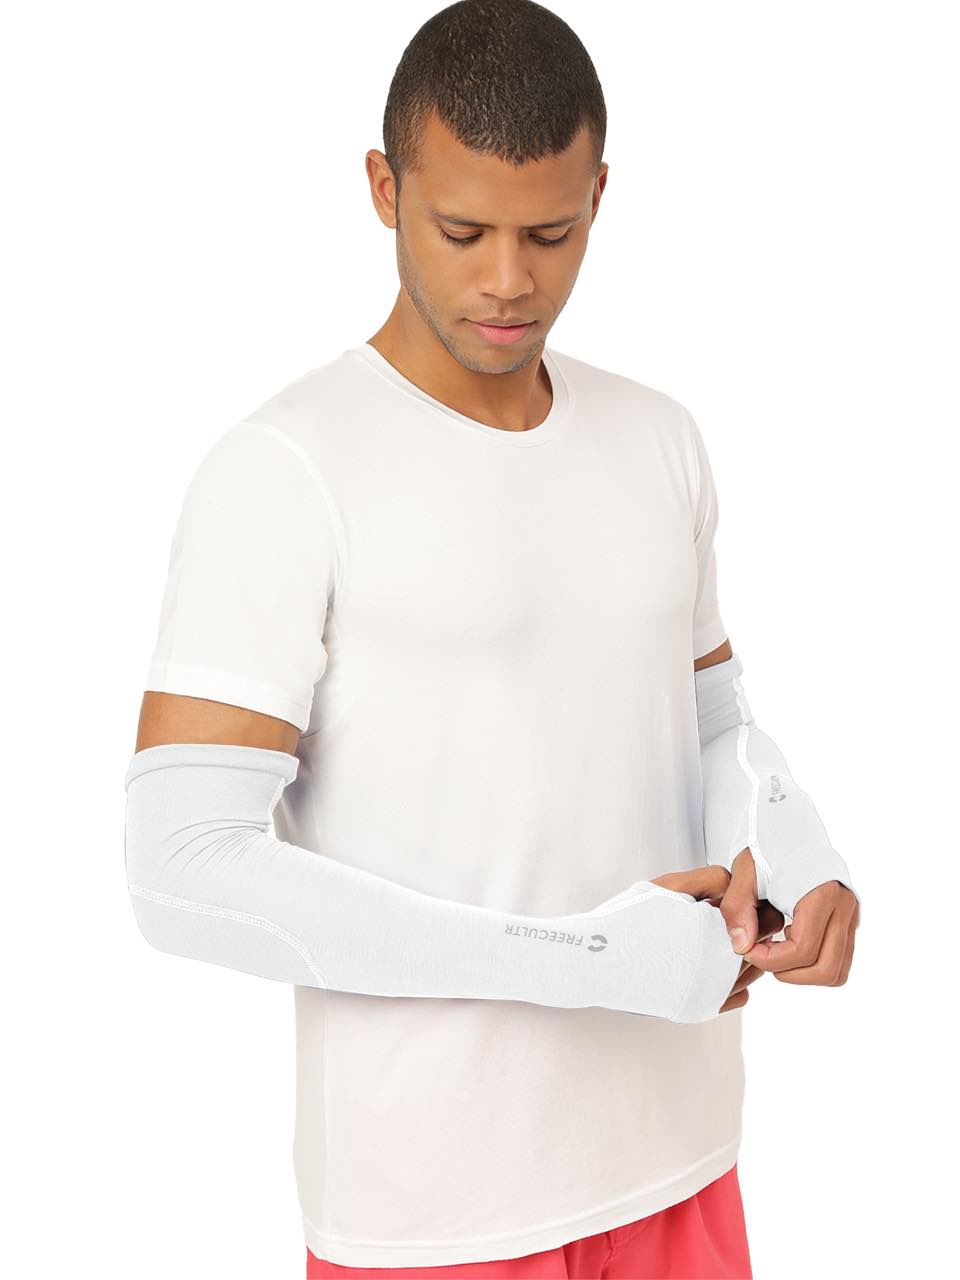 Unisex White Arm Sleeves (Pack of 1)